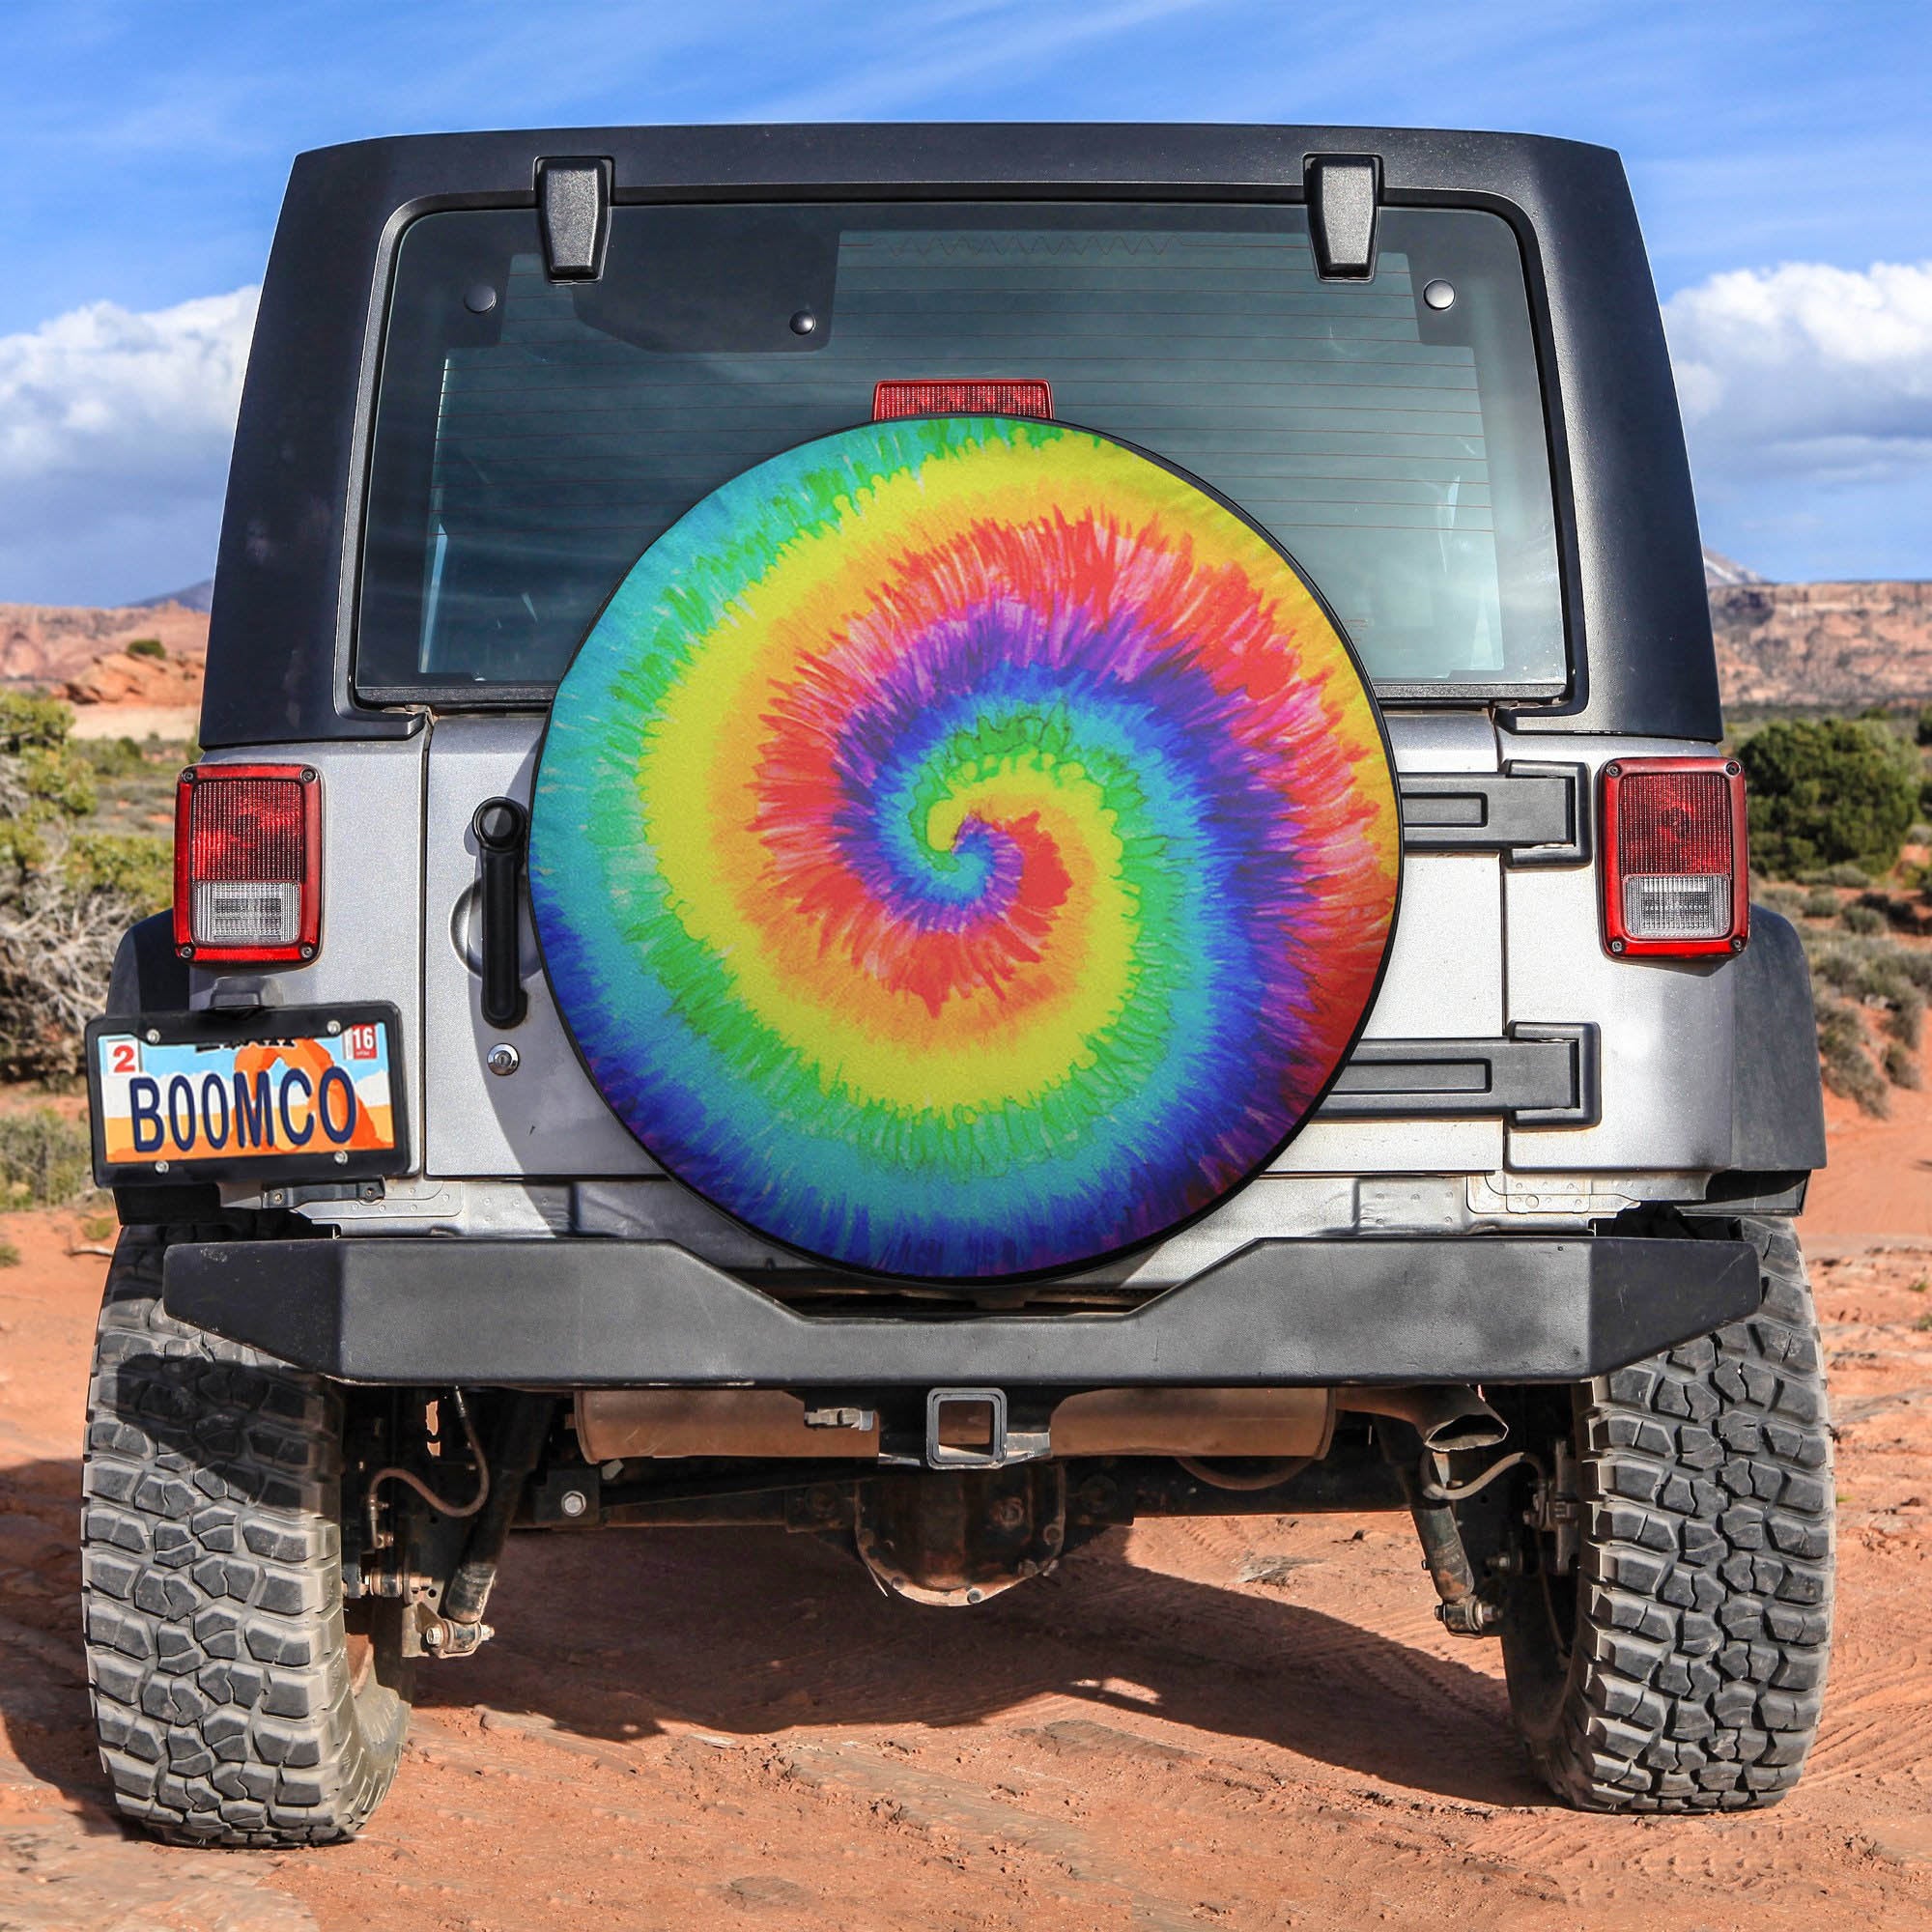 Tye Die Rainbow Spare Tire Covers Gift For Campers